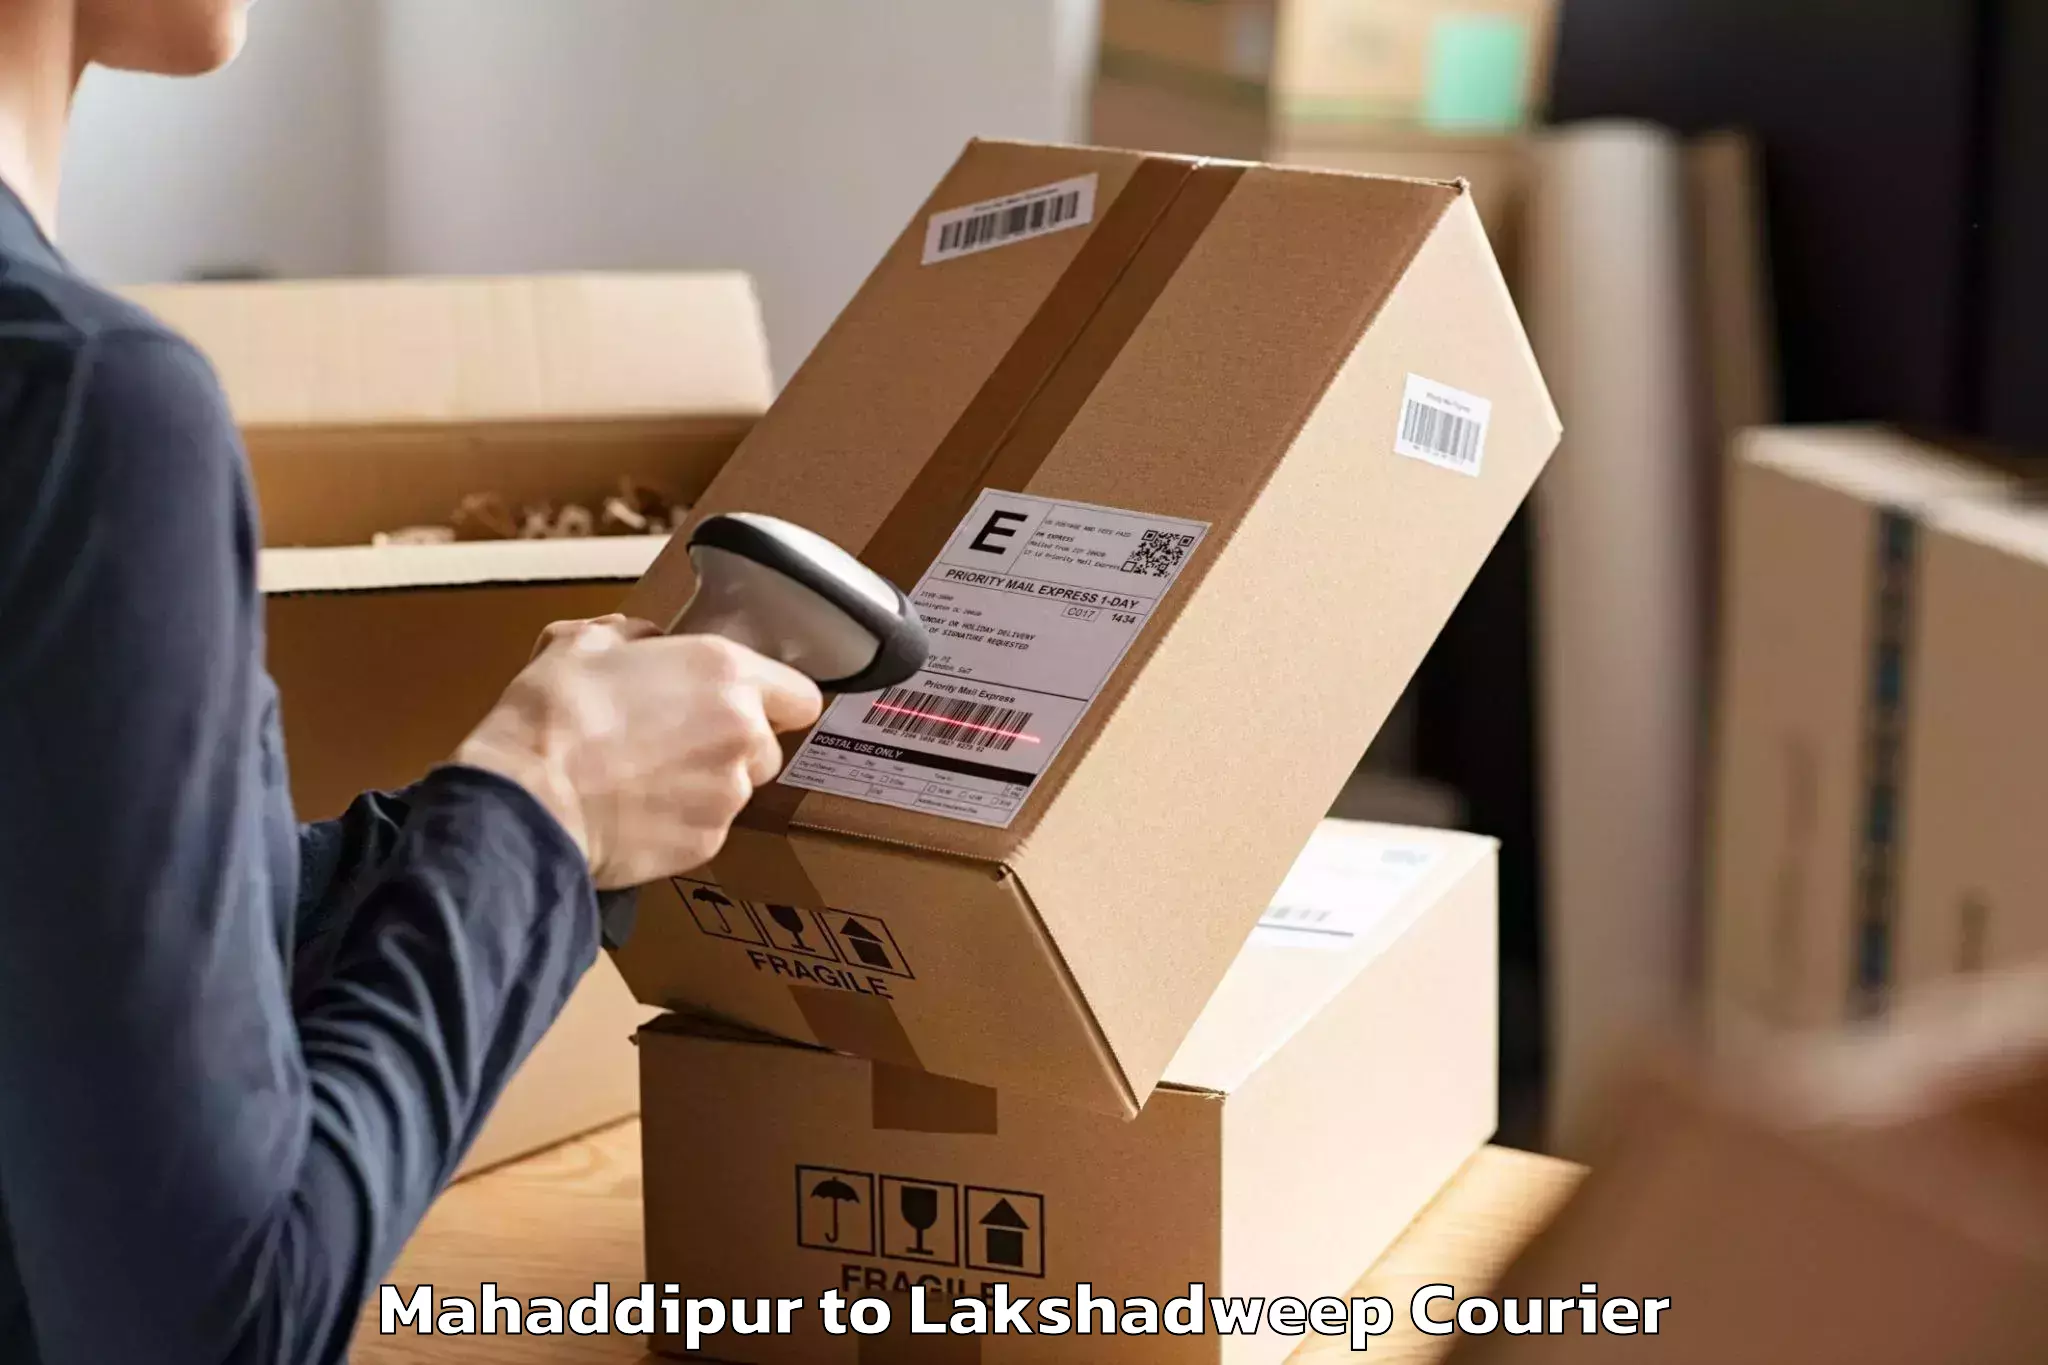 Home moving specialists Mahaddipur to Lakshadweep